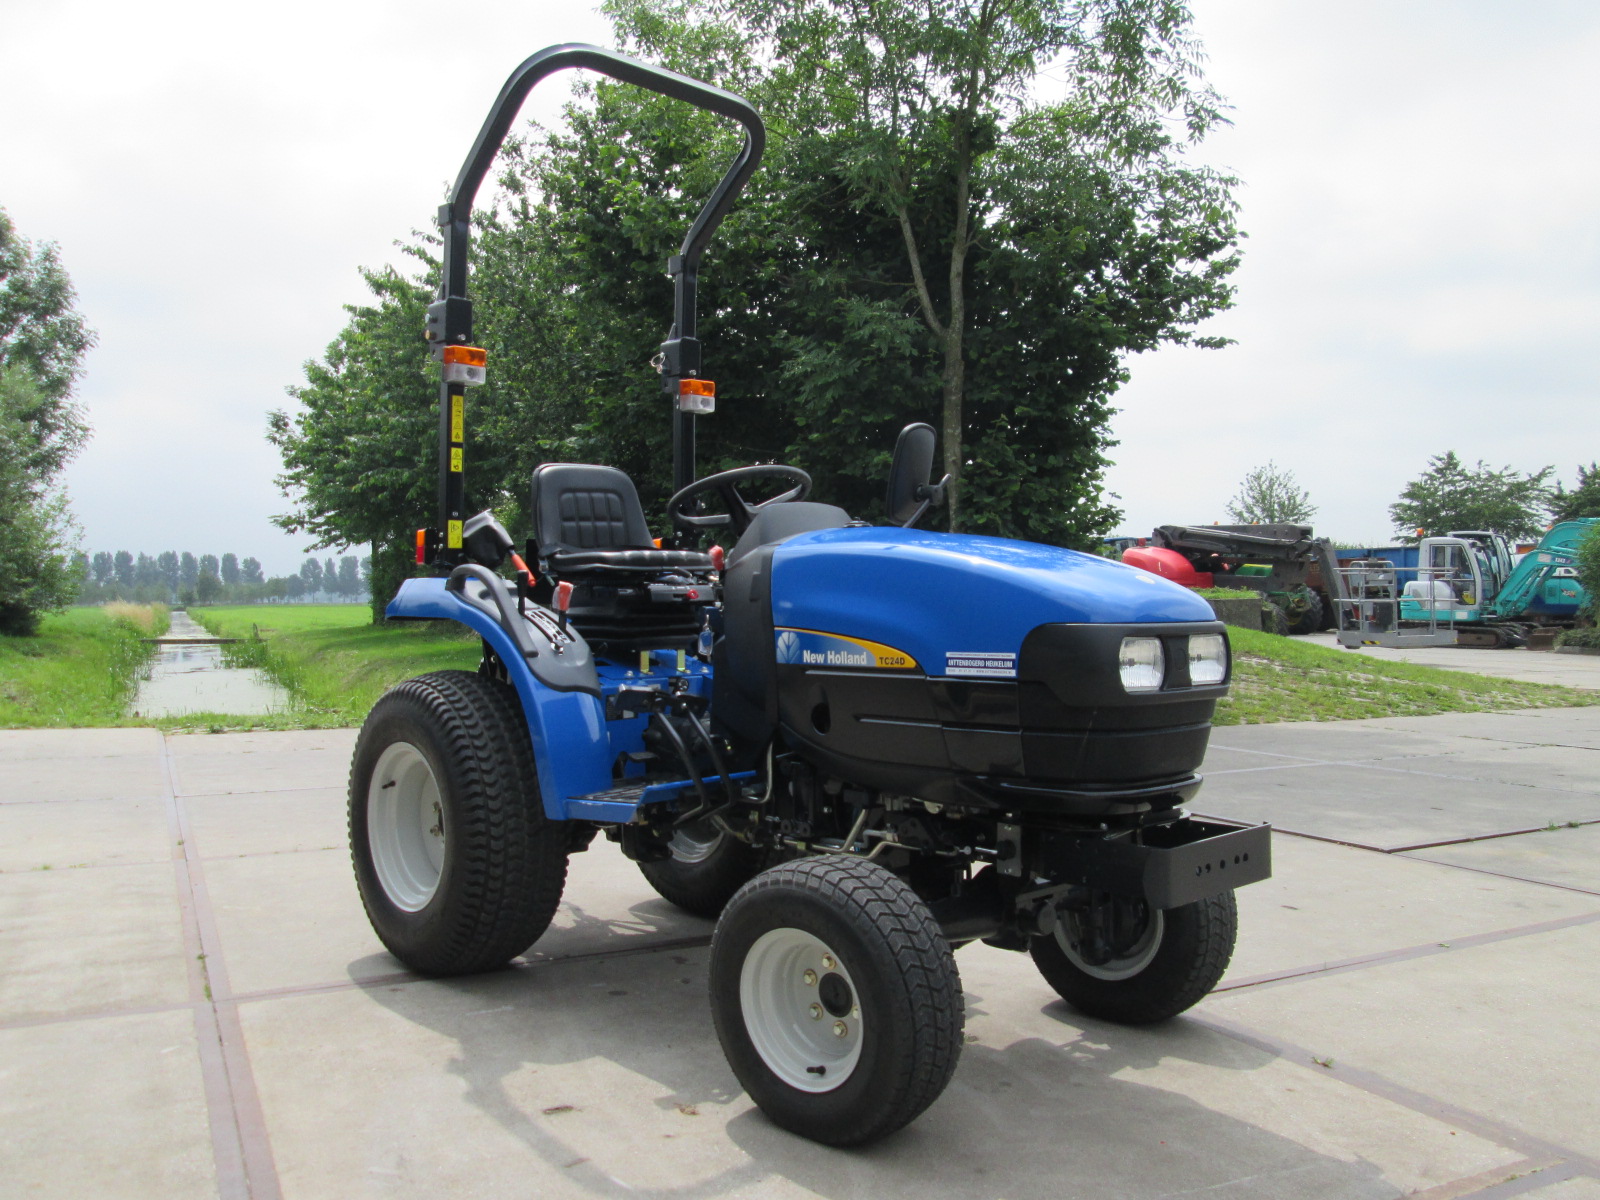 New Holland T4 Related Keywords & Suggestions - New Holland T4 Long ...